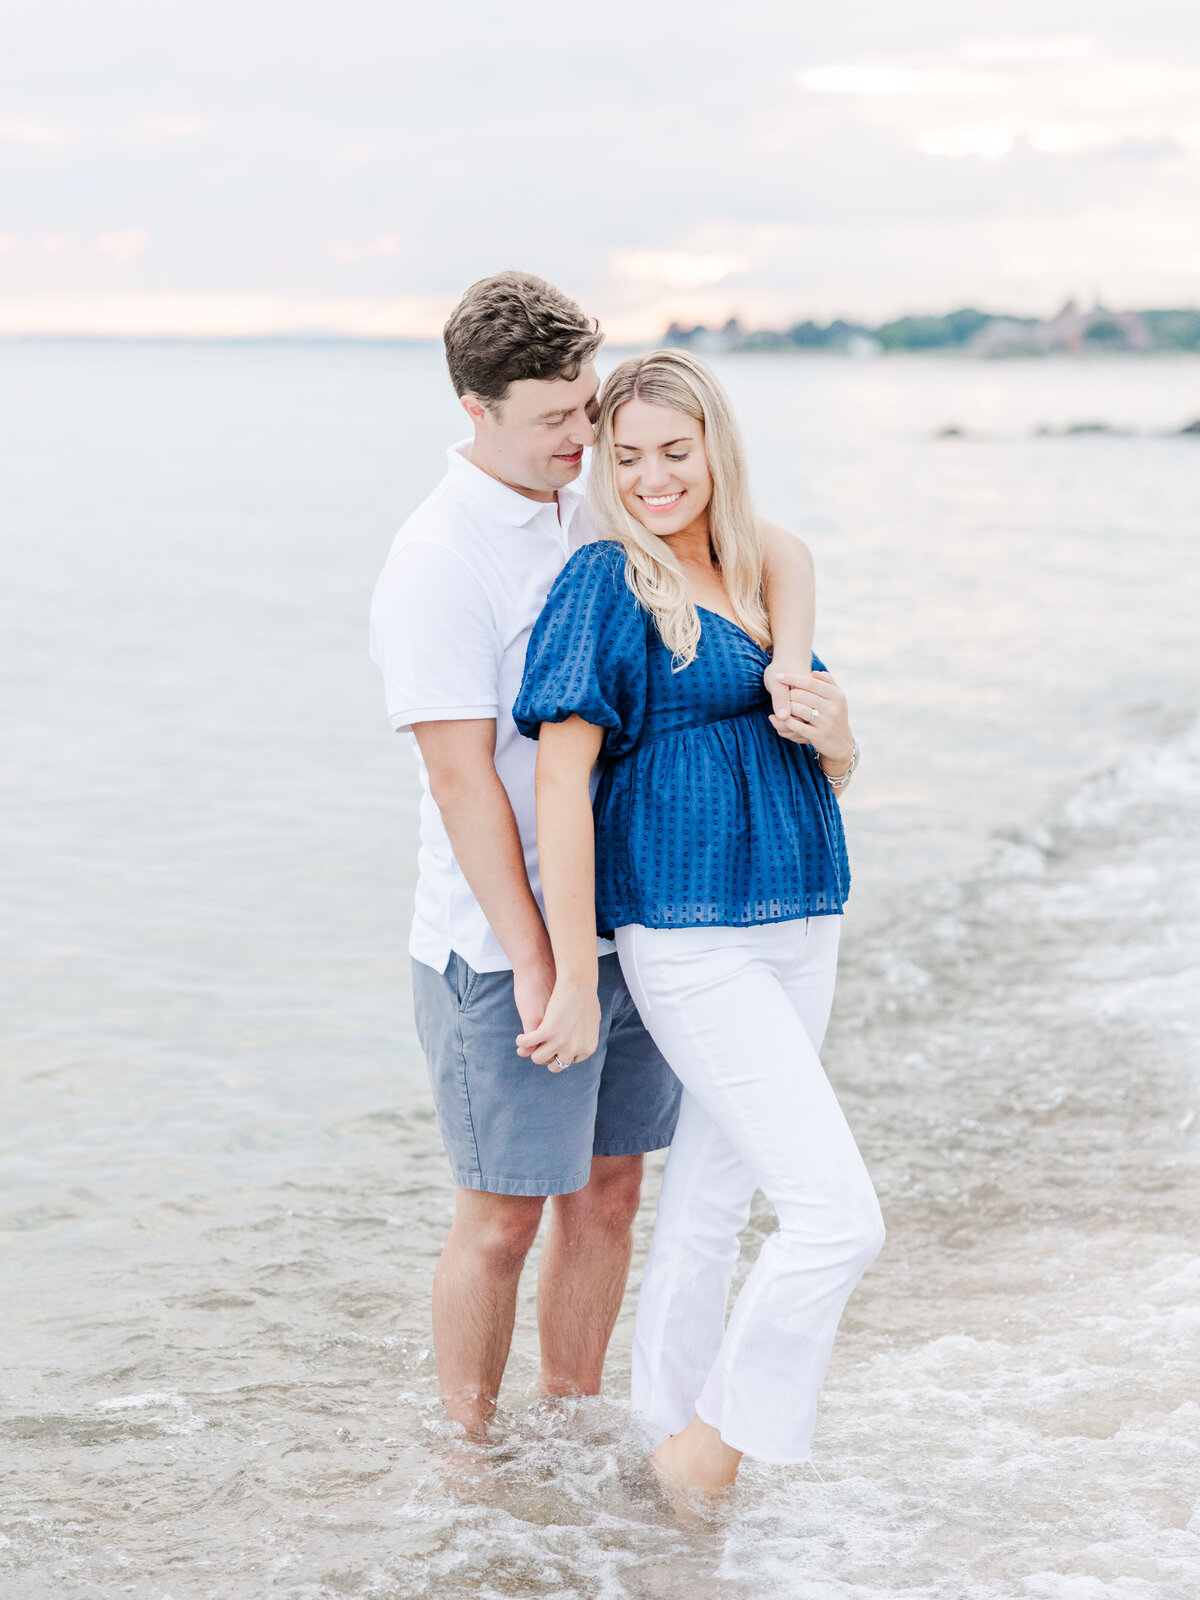 christine-antonio-engagement-session-eolia-mansion-harkness-park-waterford-ct-133